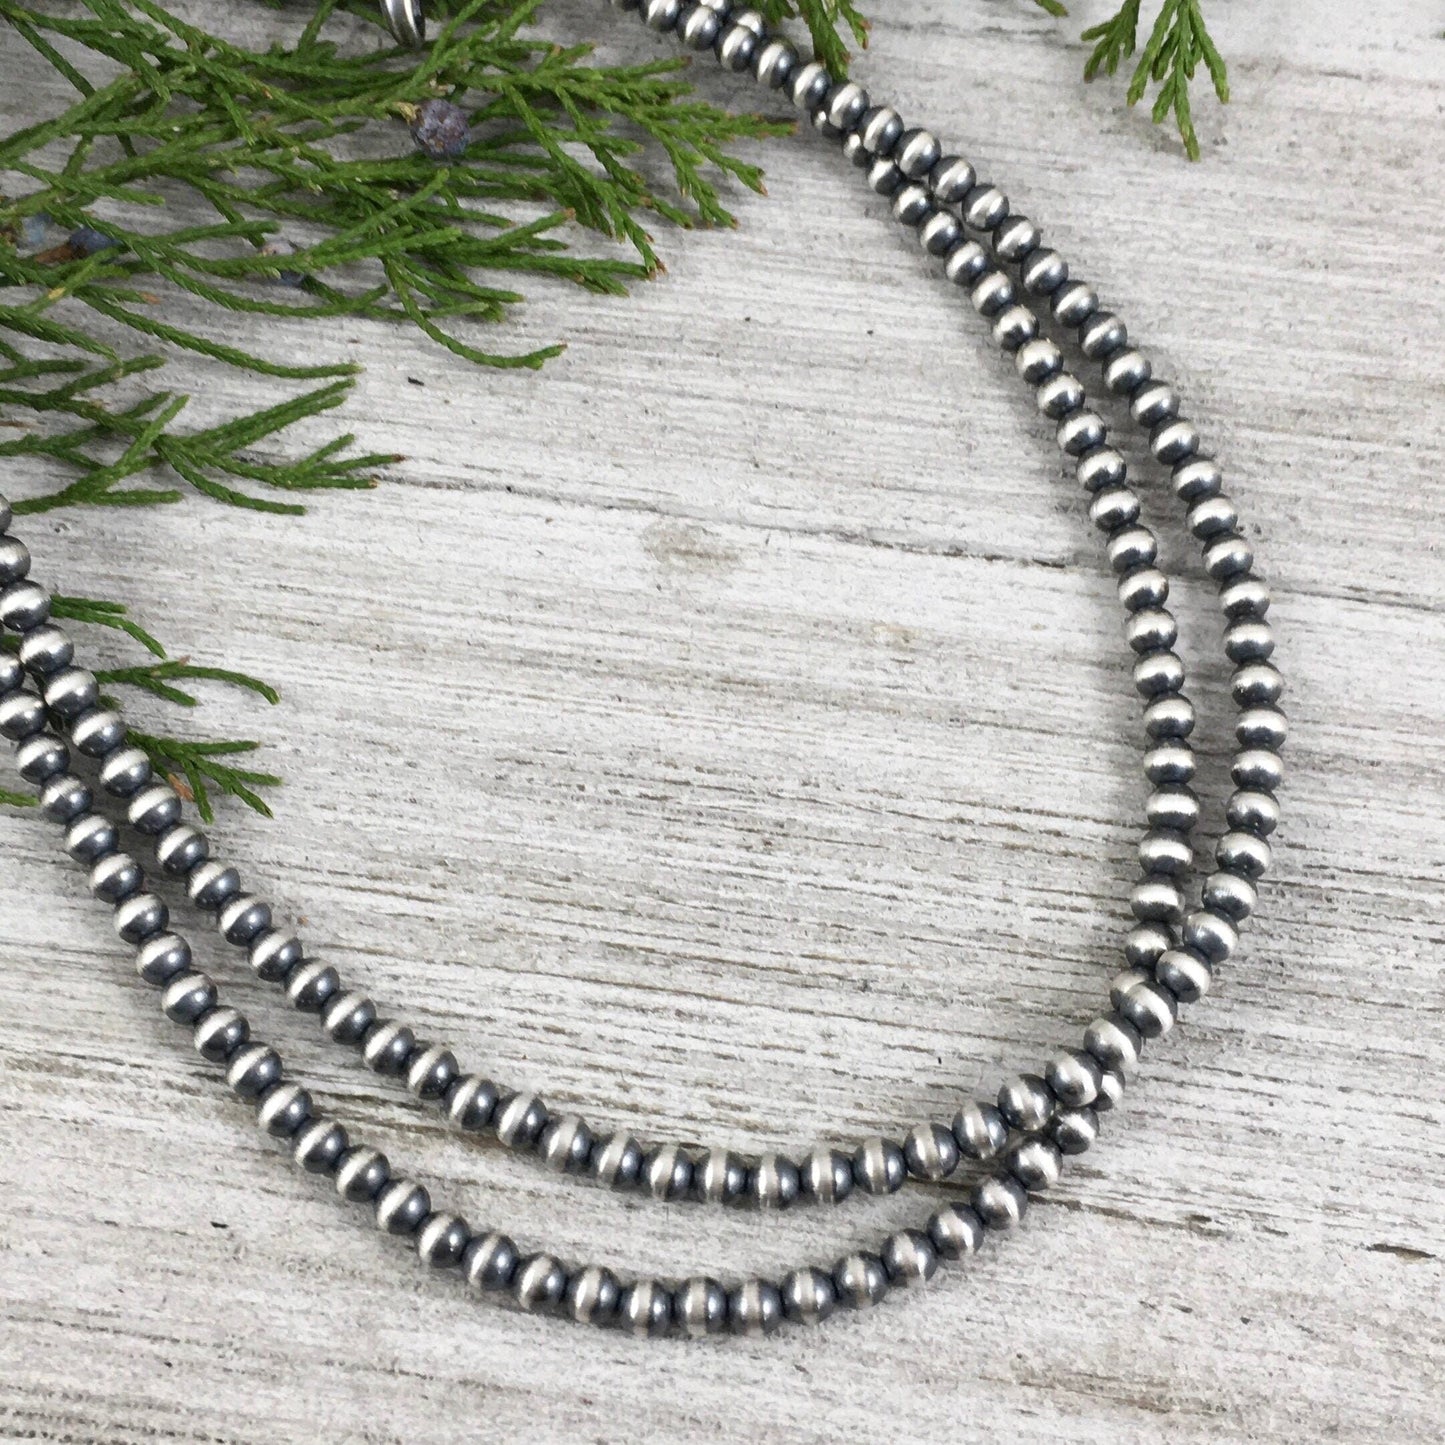 4mm Sterling Silver Bead, Necklace, Oxidized Sterling Silver, Classic Western Choker, small beads, Southwest Pearls